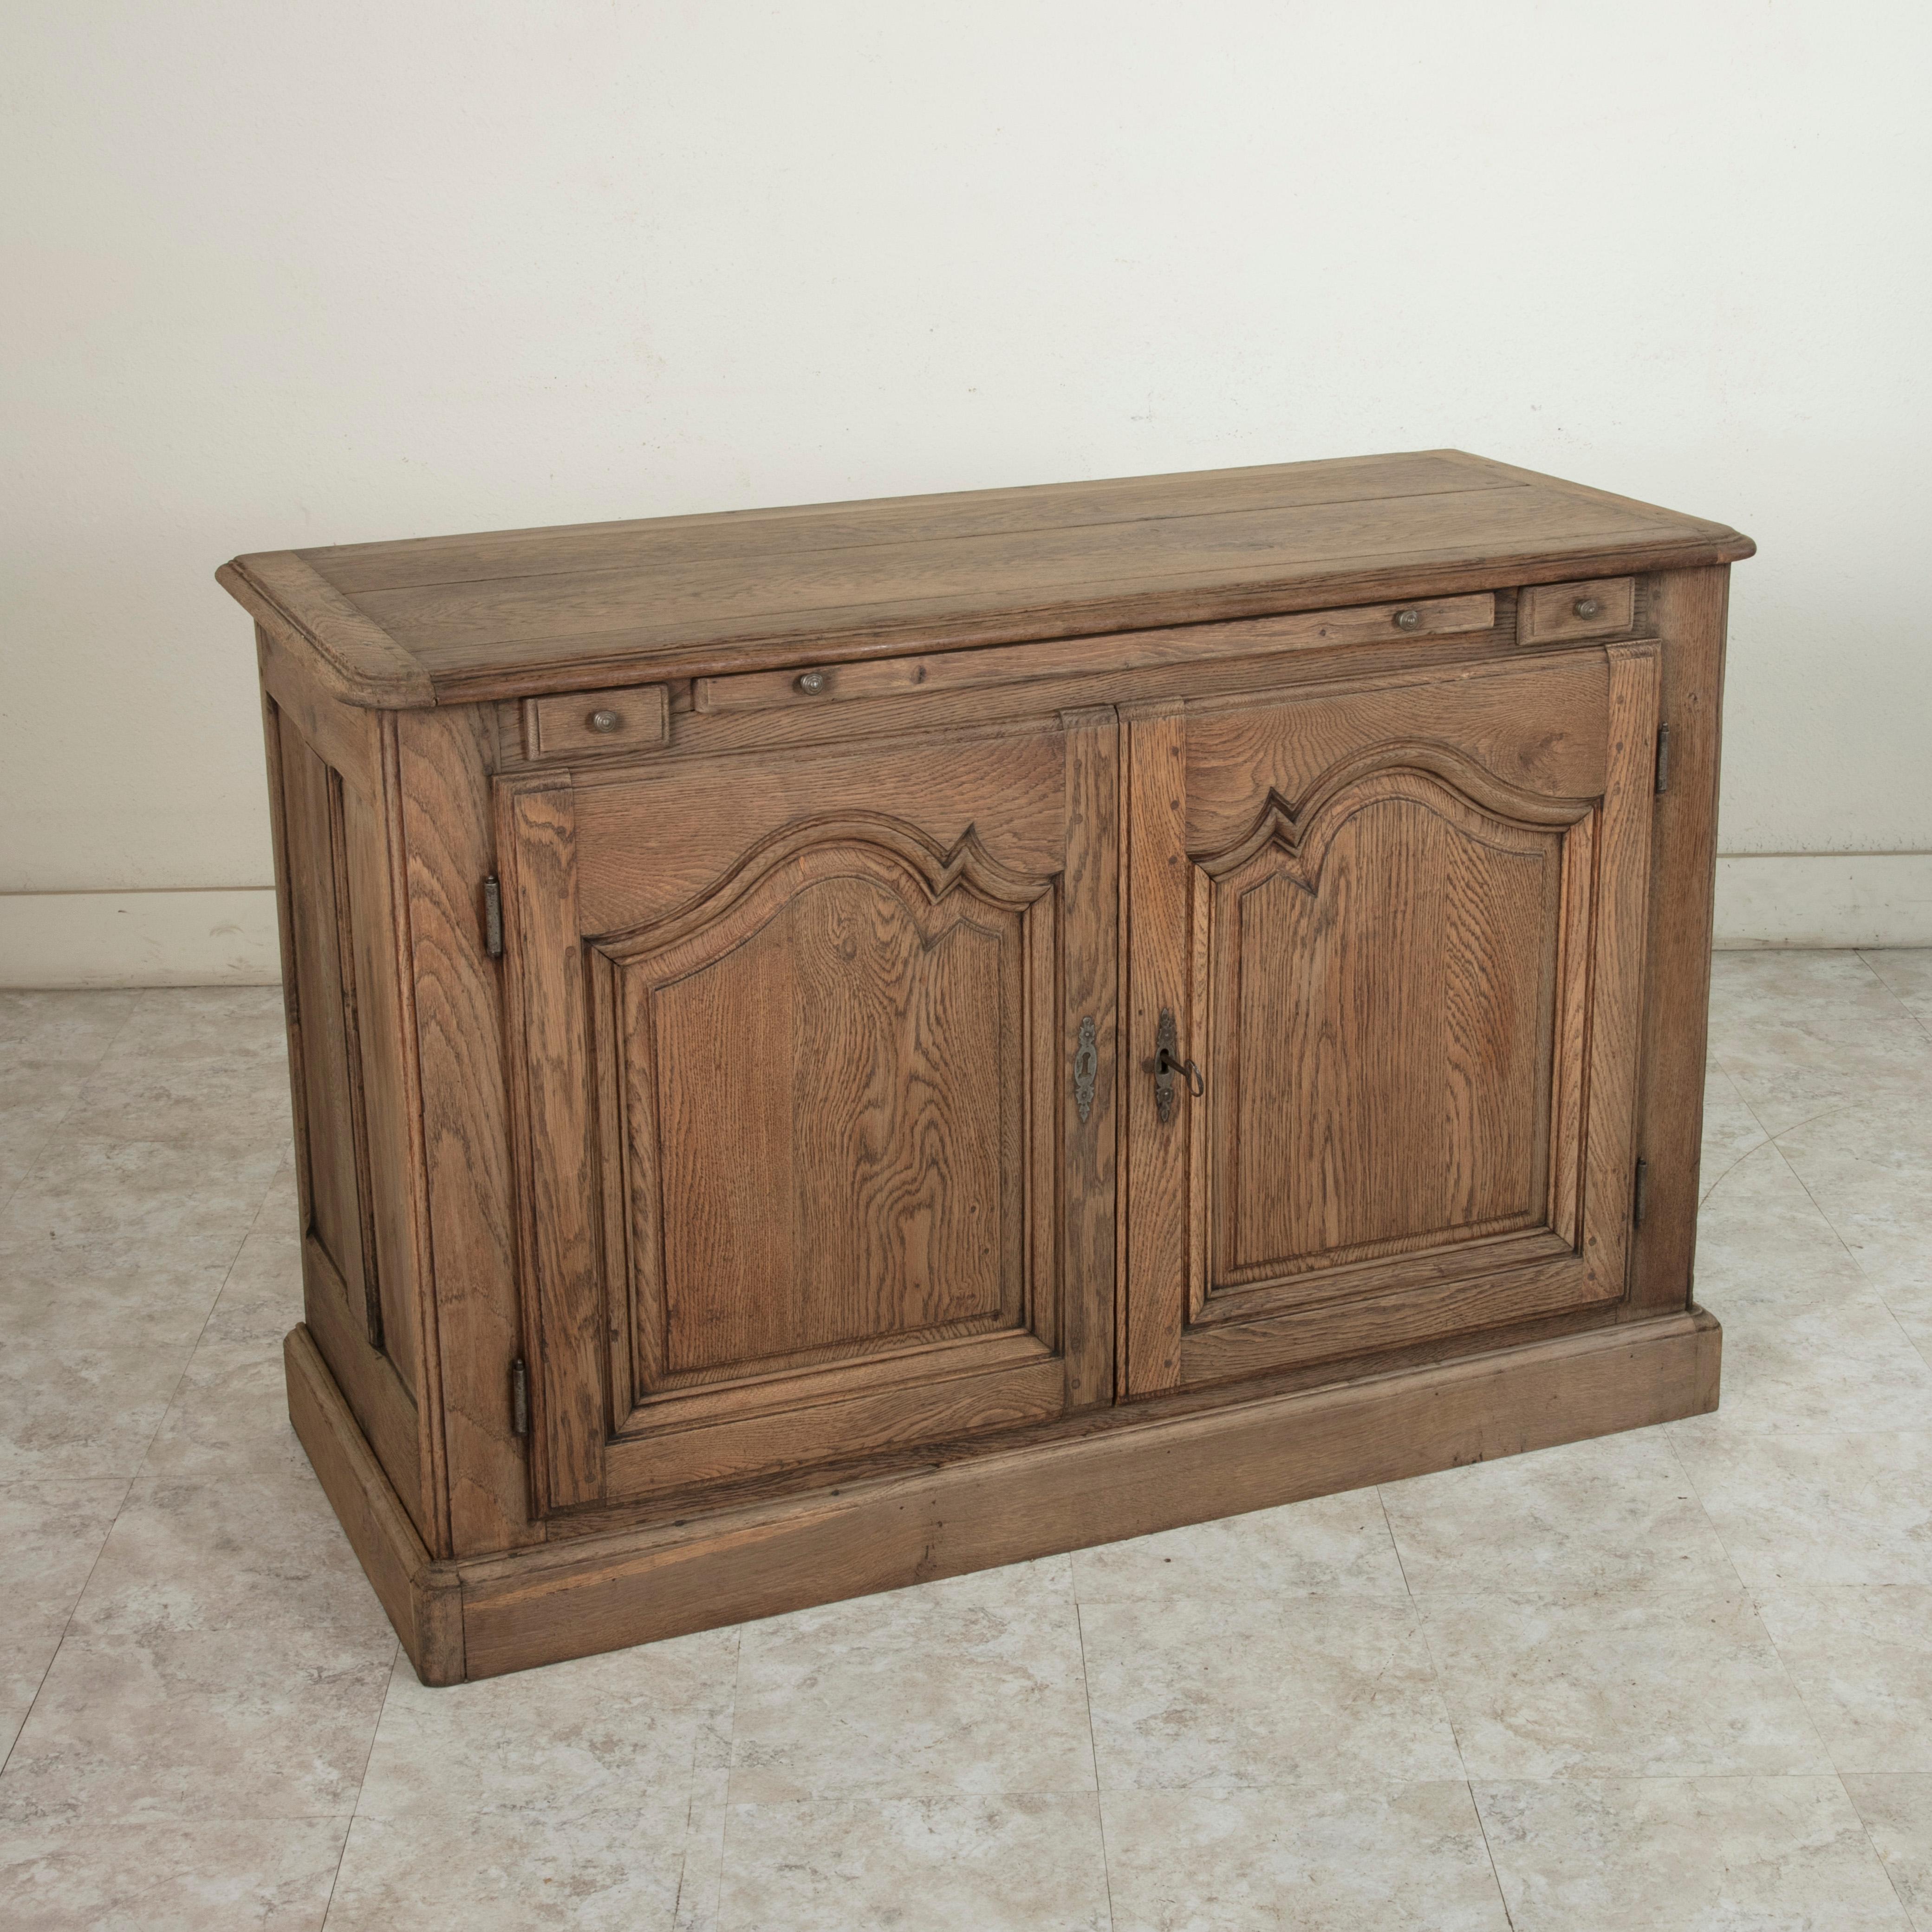 This 18th century French Louis XIV style oak hunt buffet features hand pegged solid paneled sides. Its beveled edge top rests above two drawers of dovetail construction originally used for storing carving knives. Between the drawers is a pull out